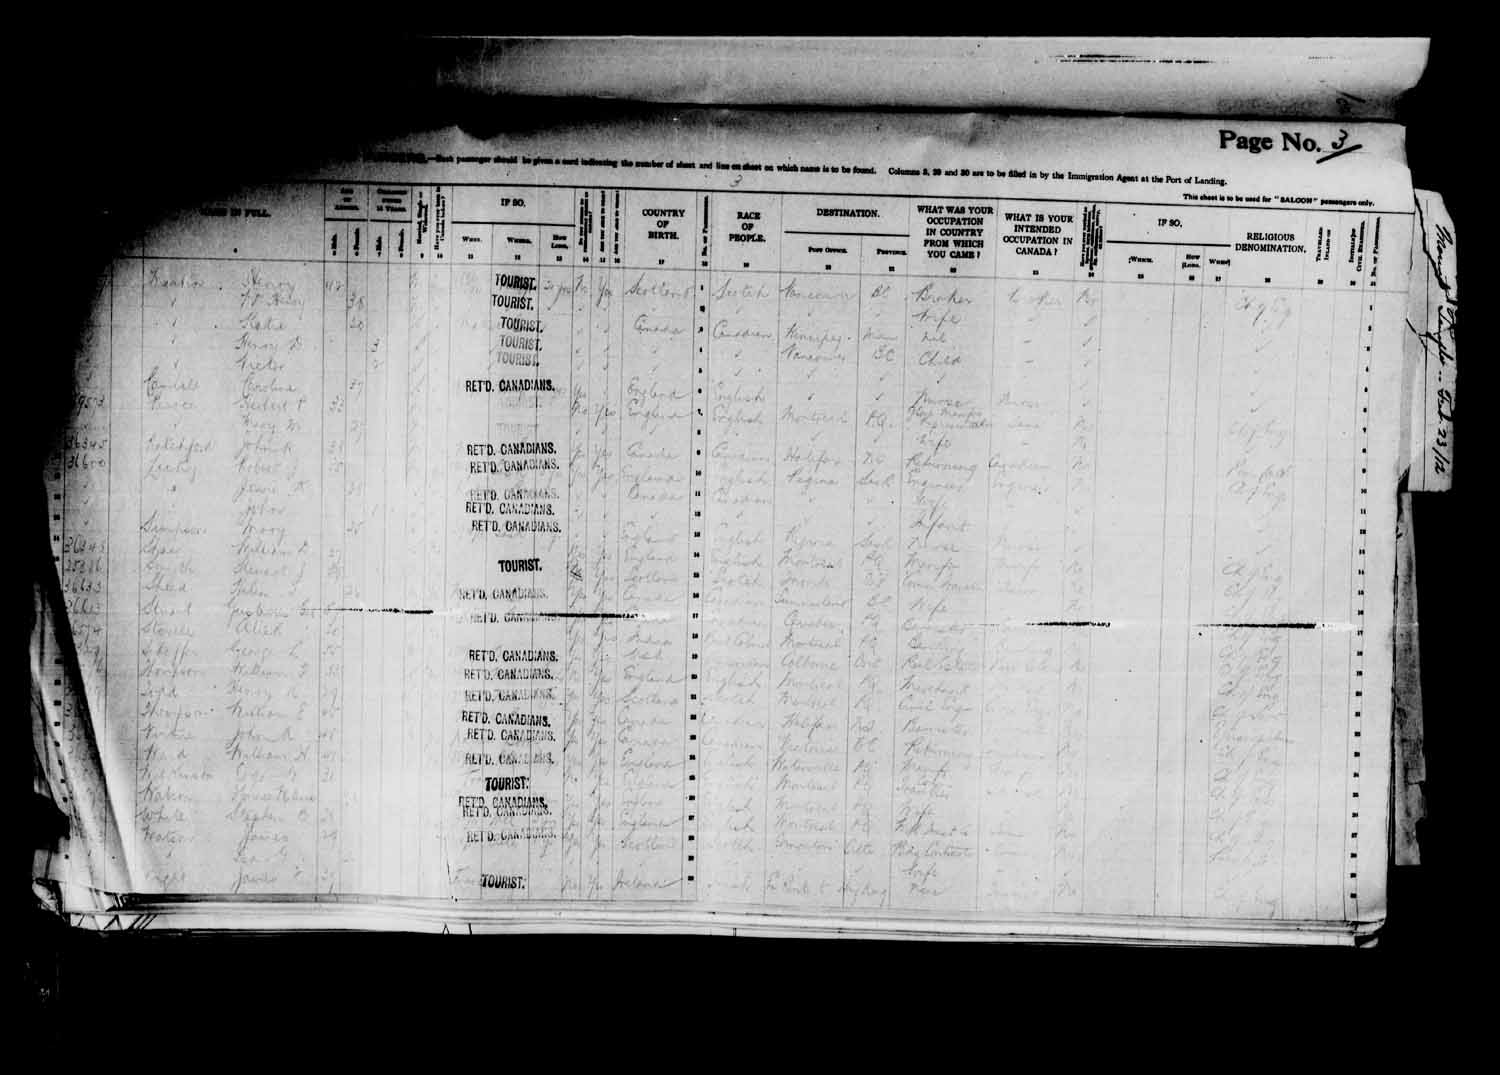 Digitized page of Passenger Lists for Image No.: e003627170